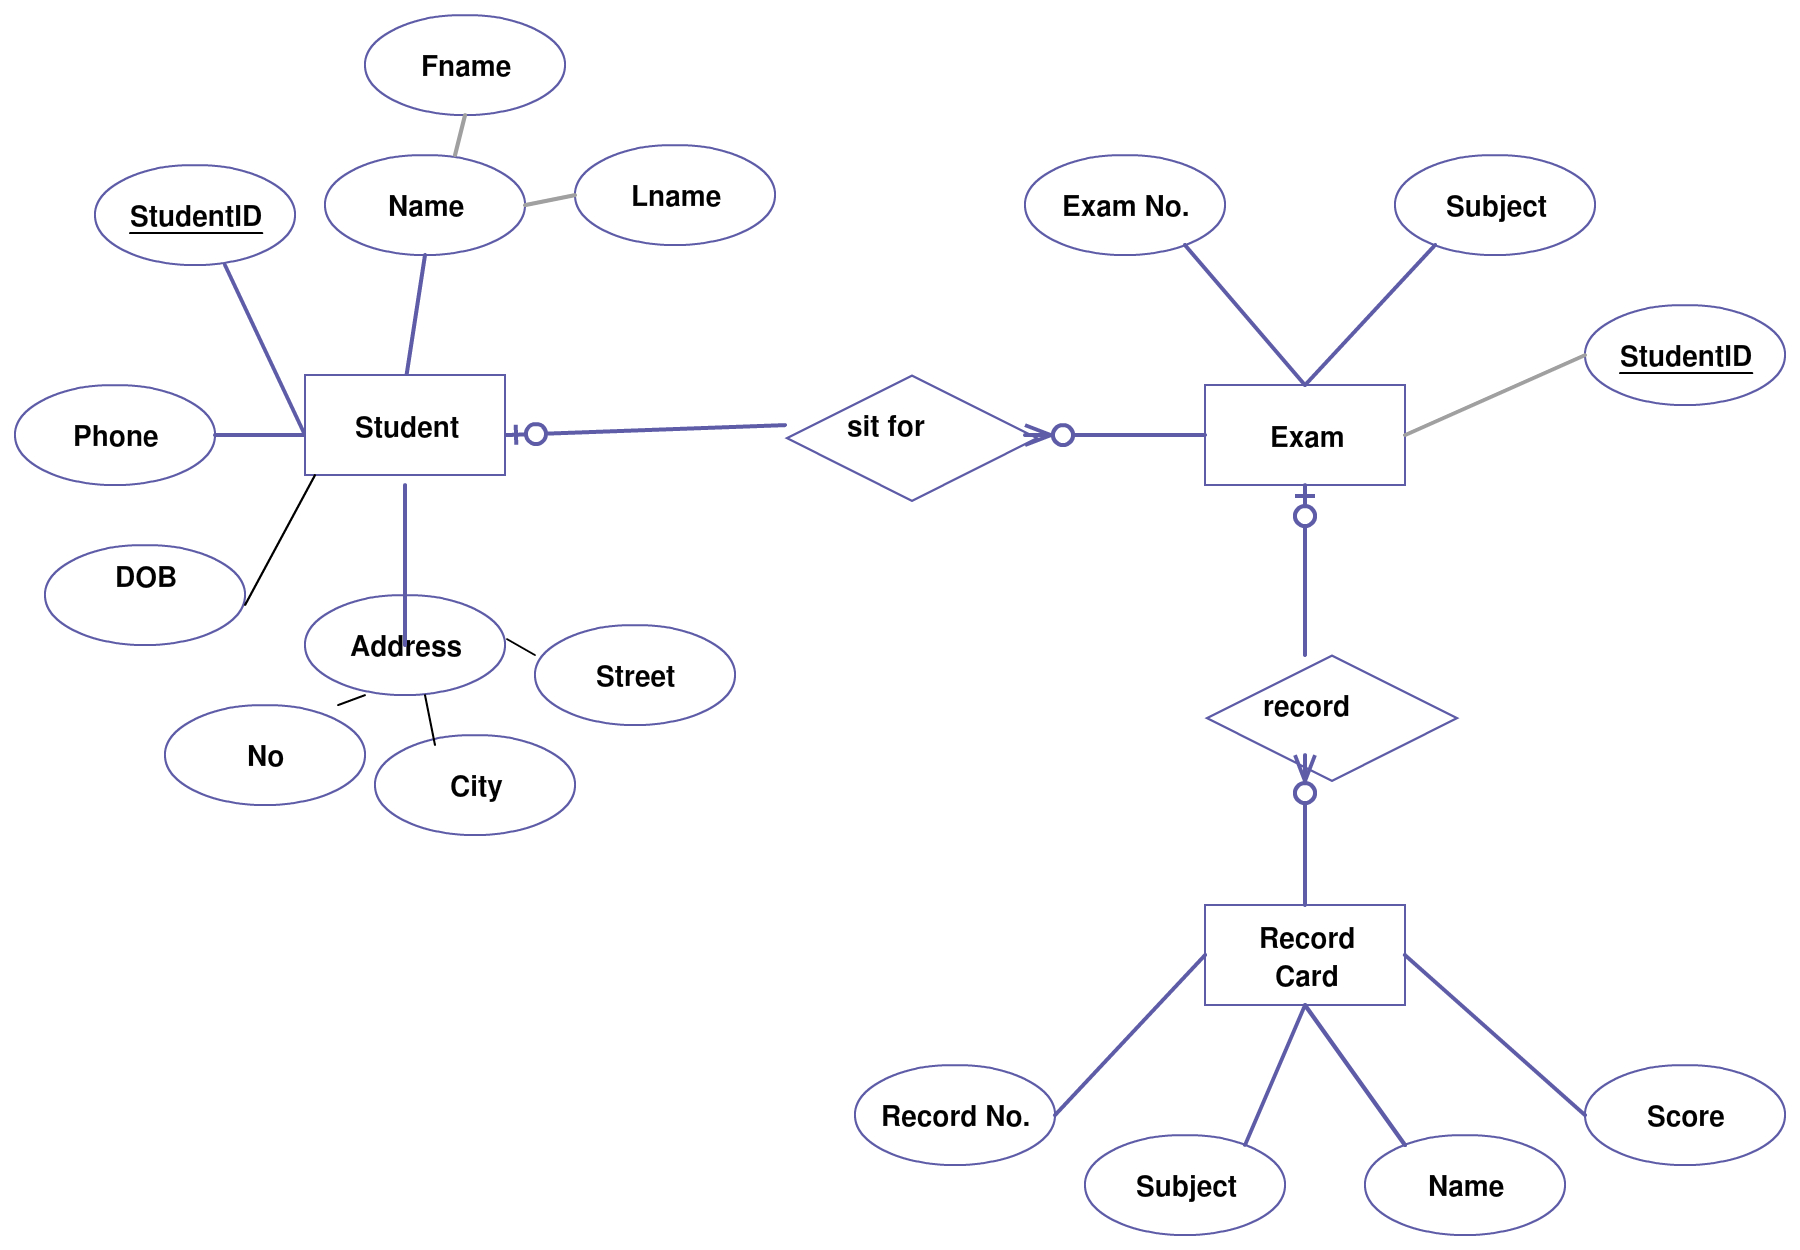 Entity Relationship Diagram (Er Diagram) Of Student Information within Er Diagram Examples Of College